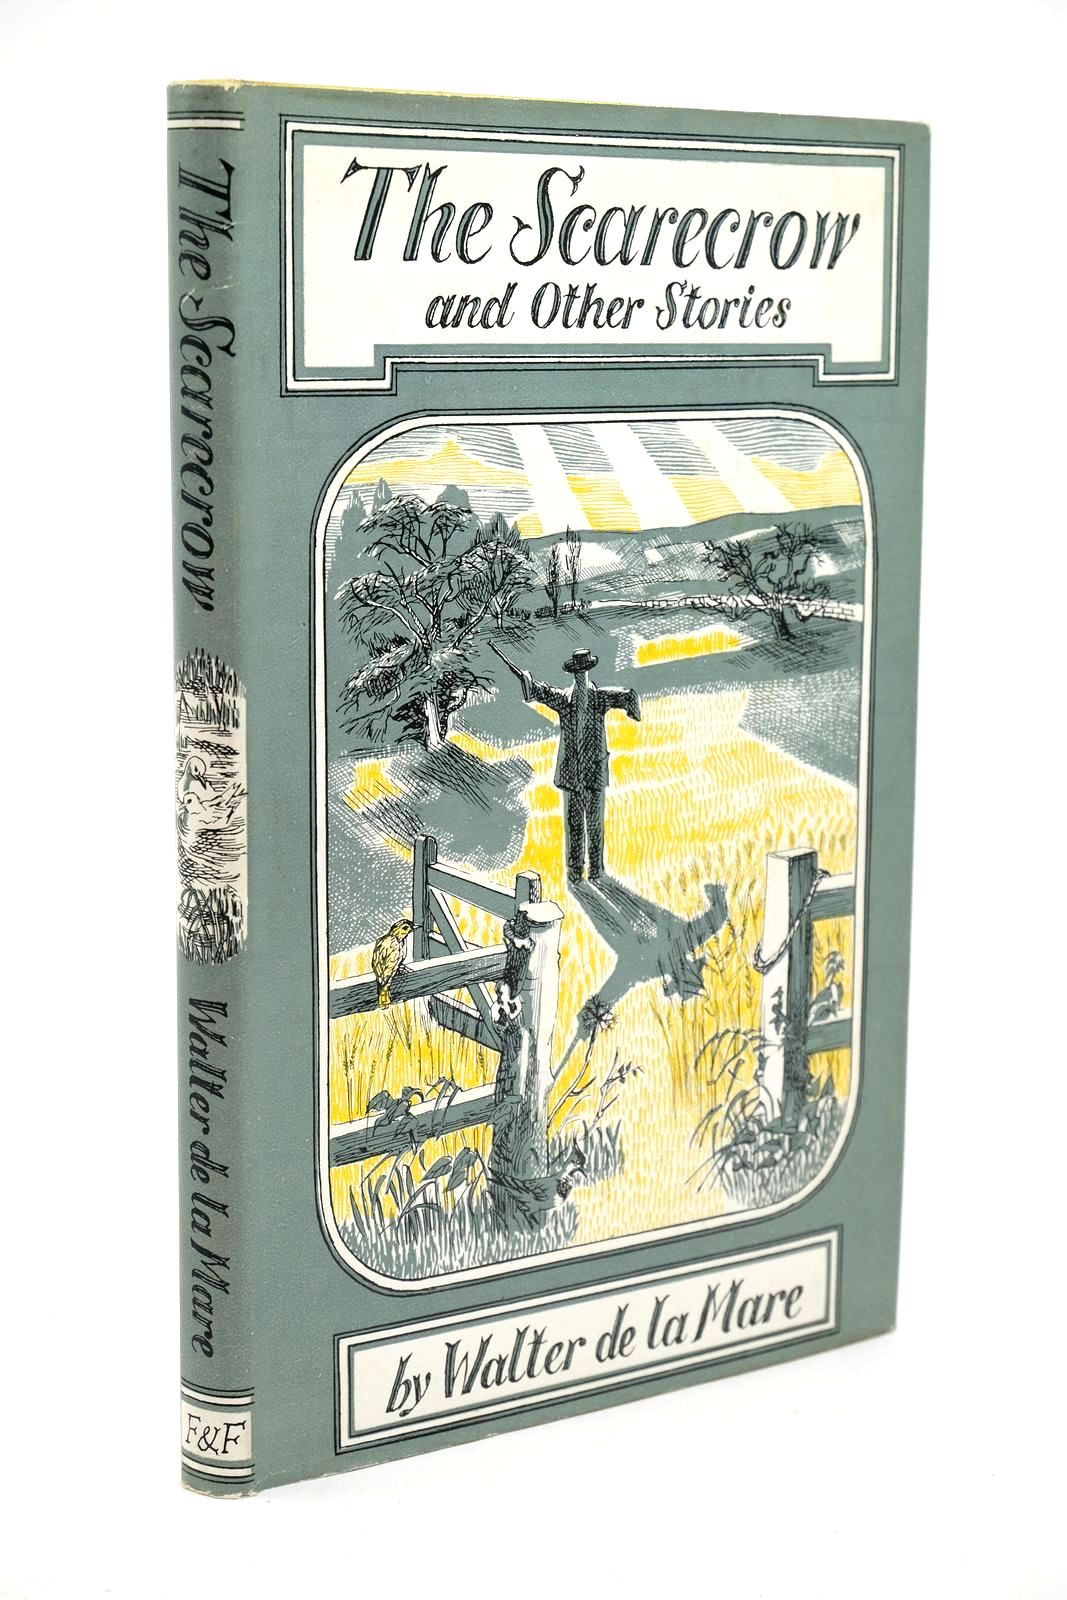 Photo of THE SCARECROW AND OTHER STORIES written by De La Mare, Walter illustrated by Hawkins, Irene published by Faber &amp; Faber (STOCK CODE: 1322912)  for sale by Stella & Rose's Books